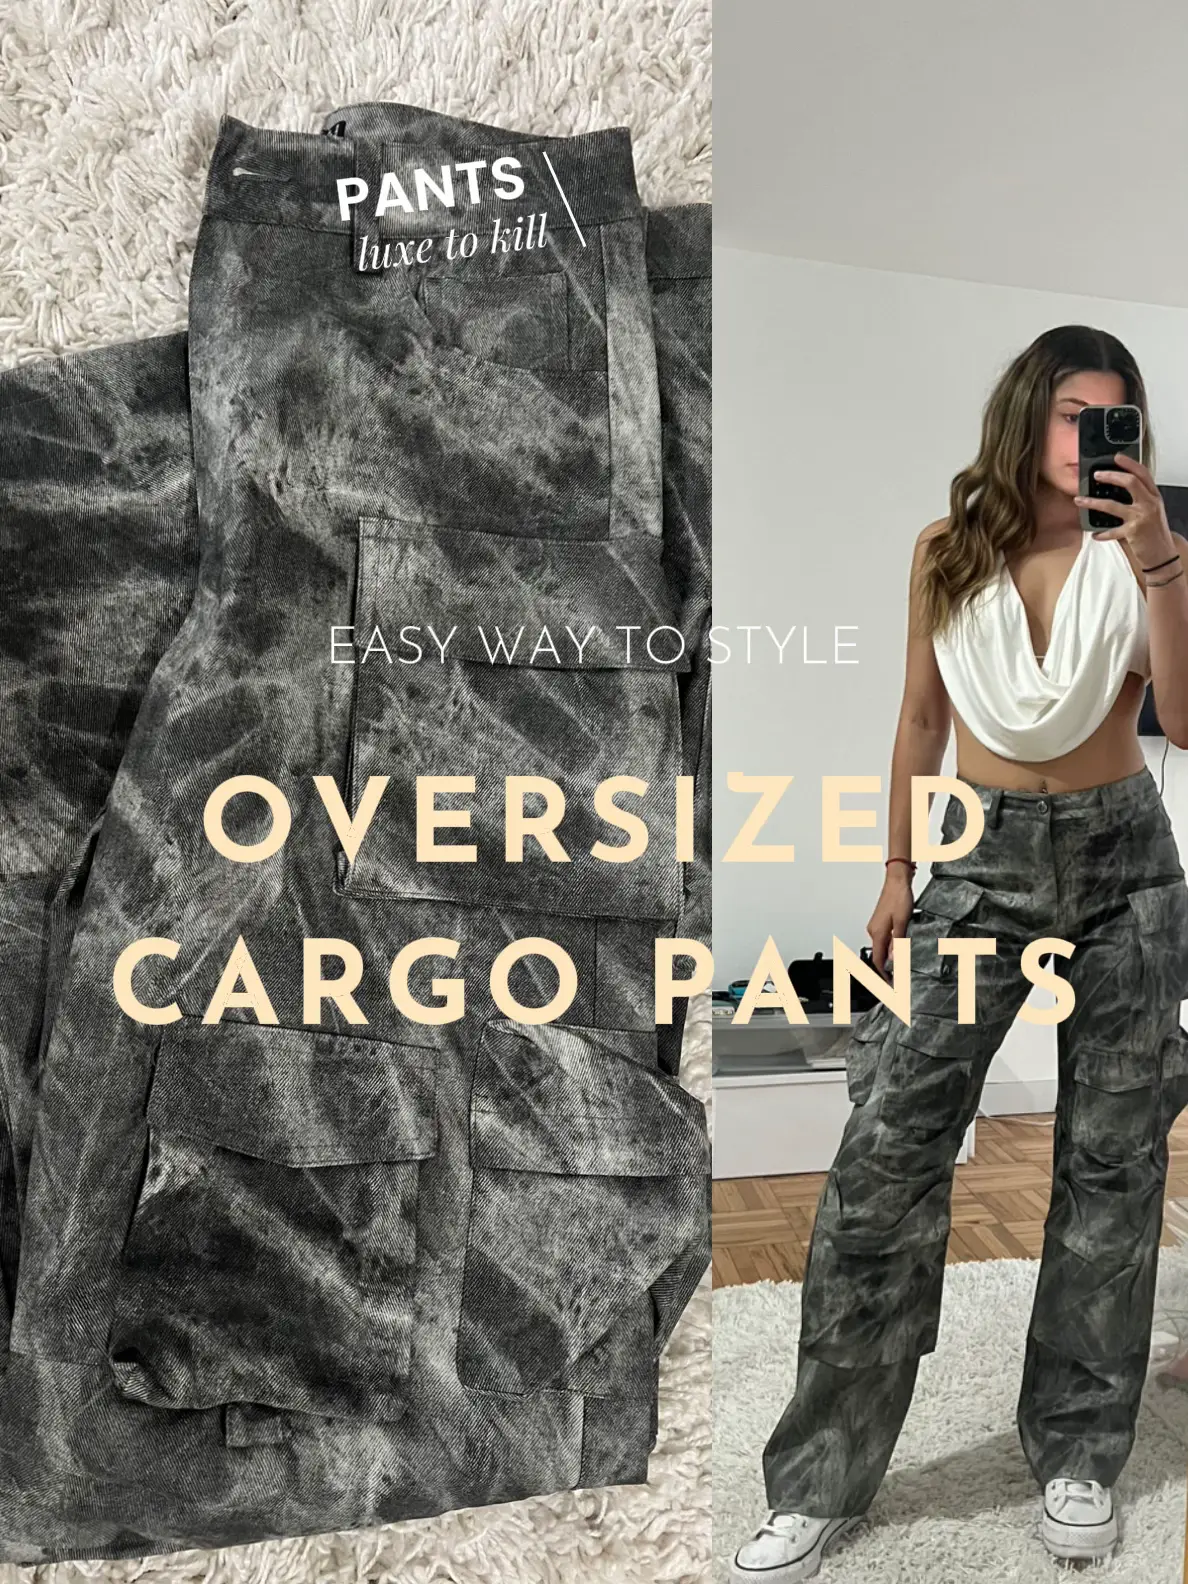 Halara - Cargo pants are seen everywhere on the streets 